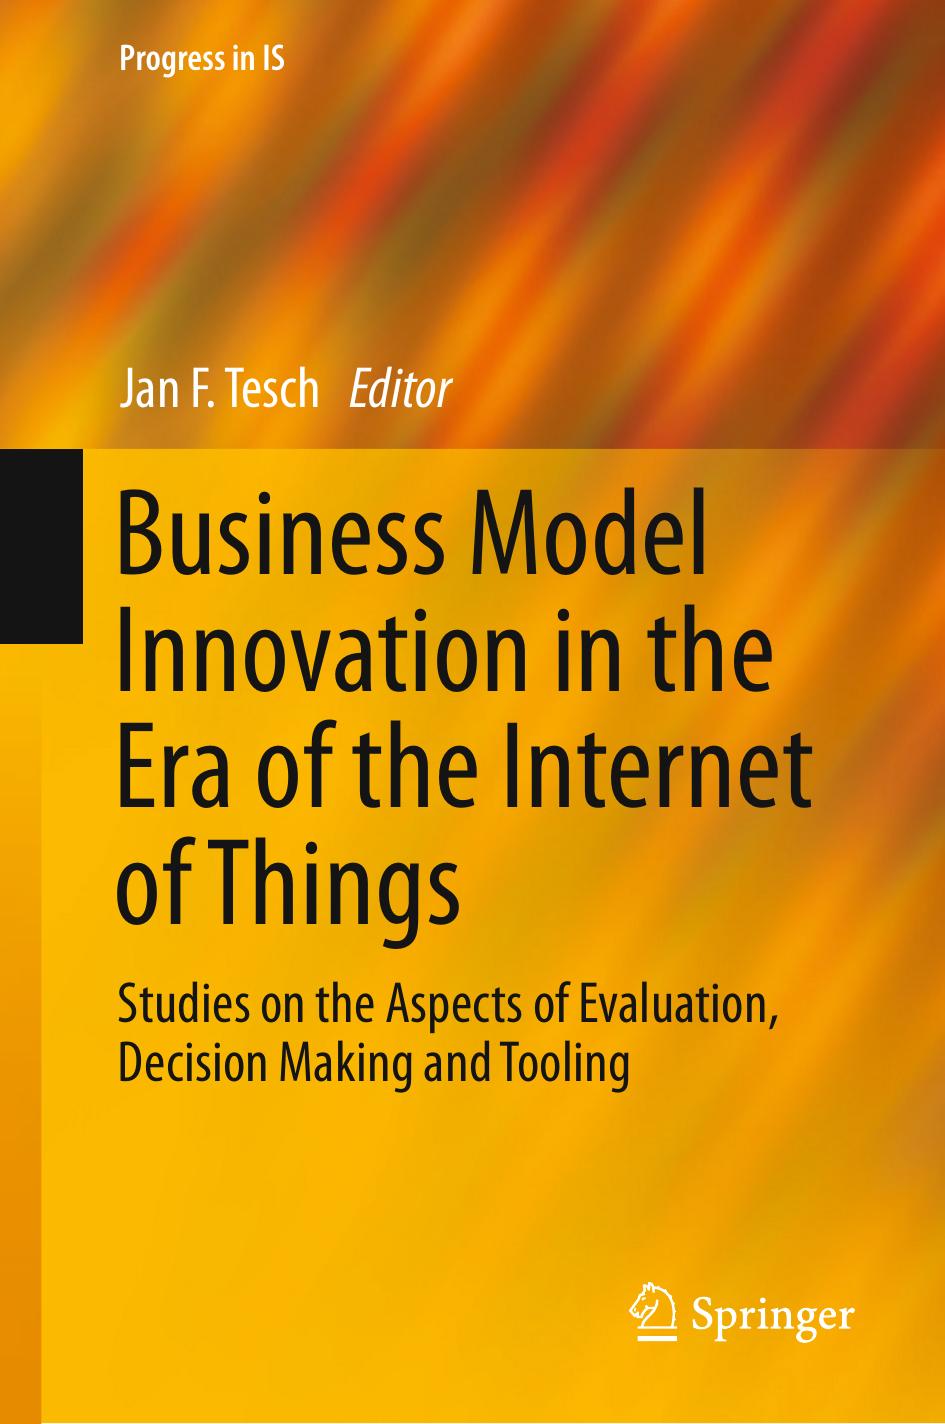 Business Model Innovation in the Era of the Internet of Things: Studies on the Aspects of Evaluation, Decision Making and Tooling